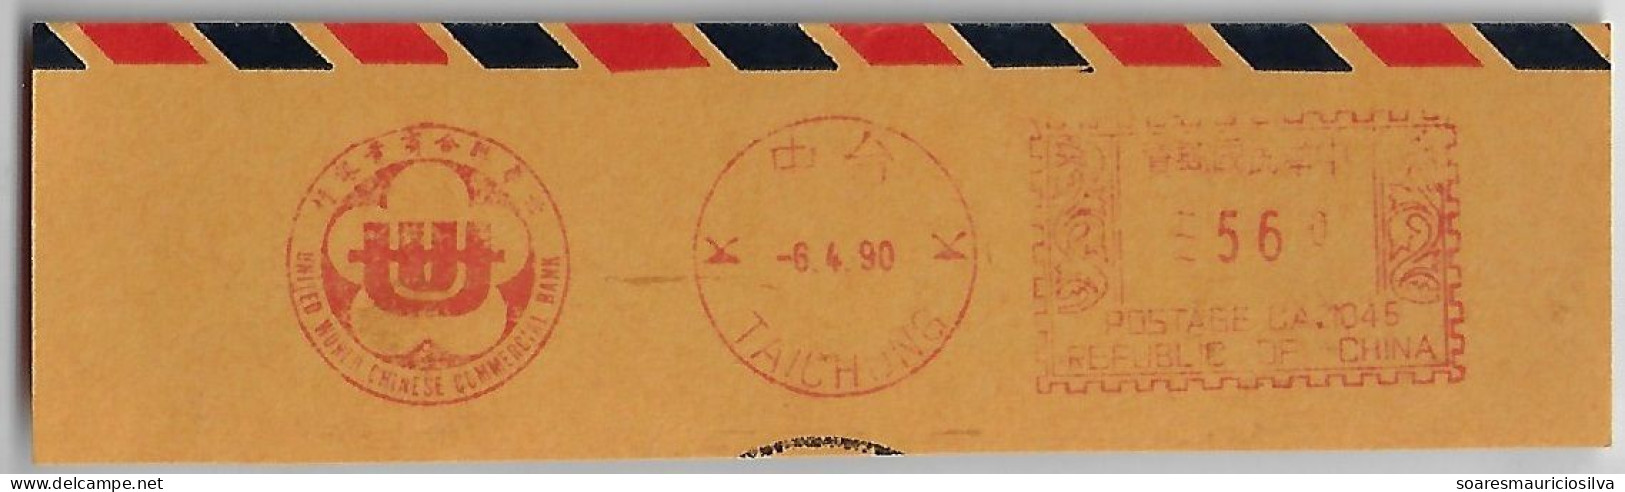 Taiwan 1990 Fragment Meter Stamp Pitney Bowes Slogan United World Chinese Commercial Bank Taichung Flower Plum Blossom - Lettres & Documents